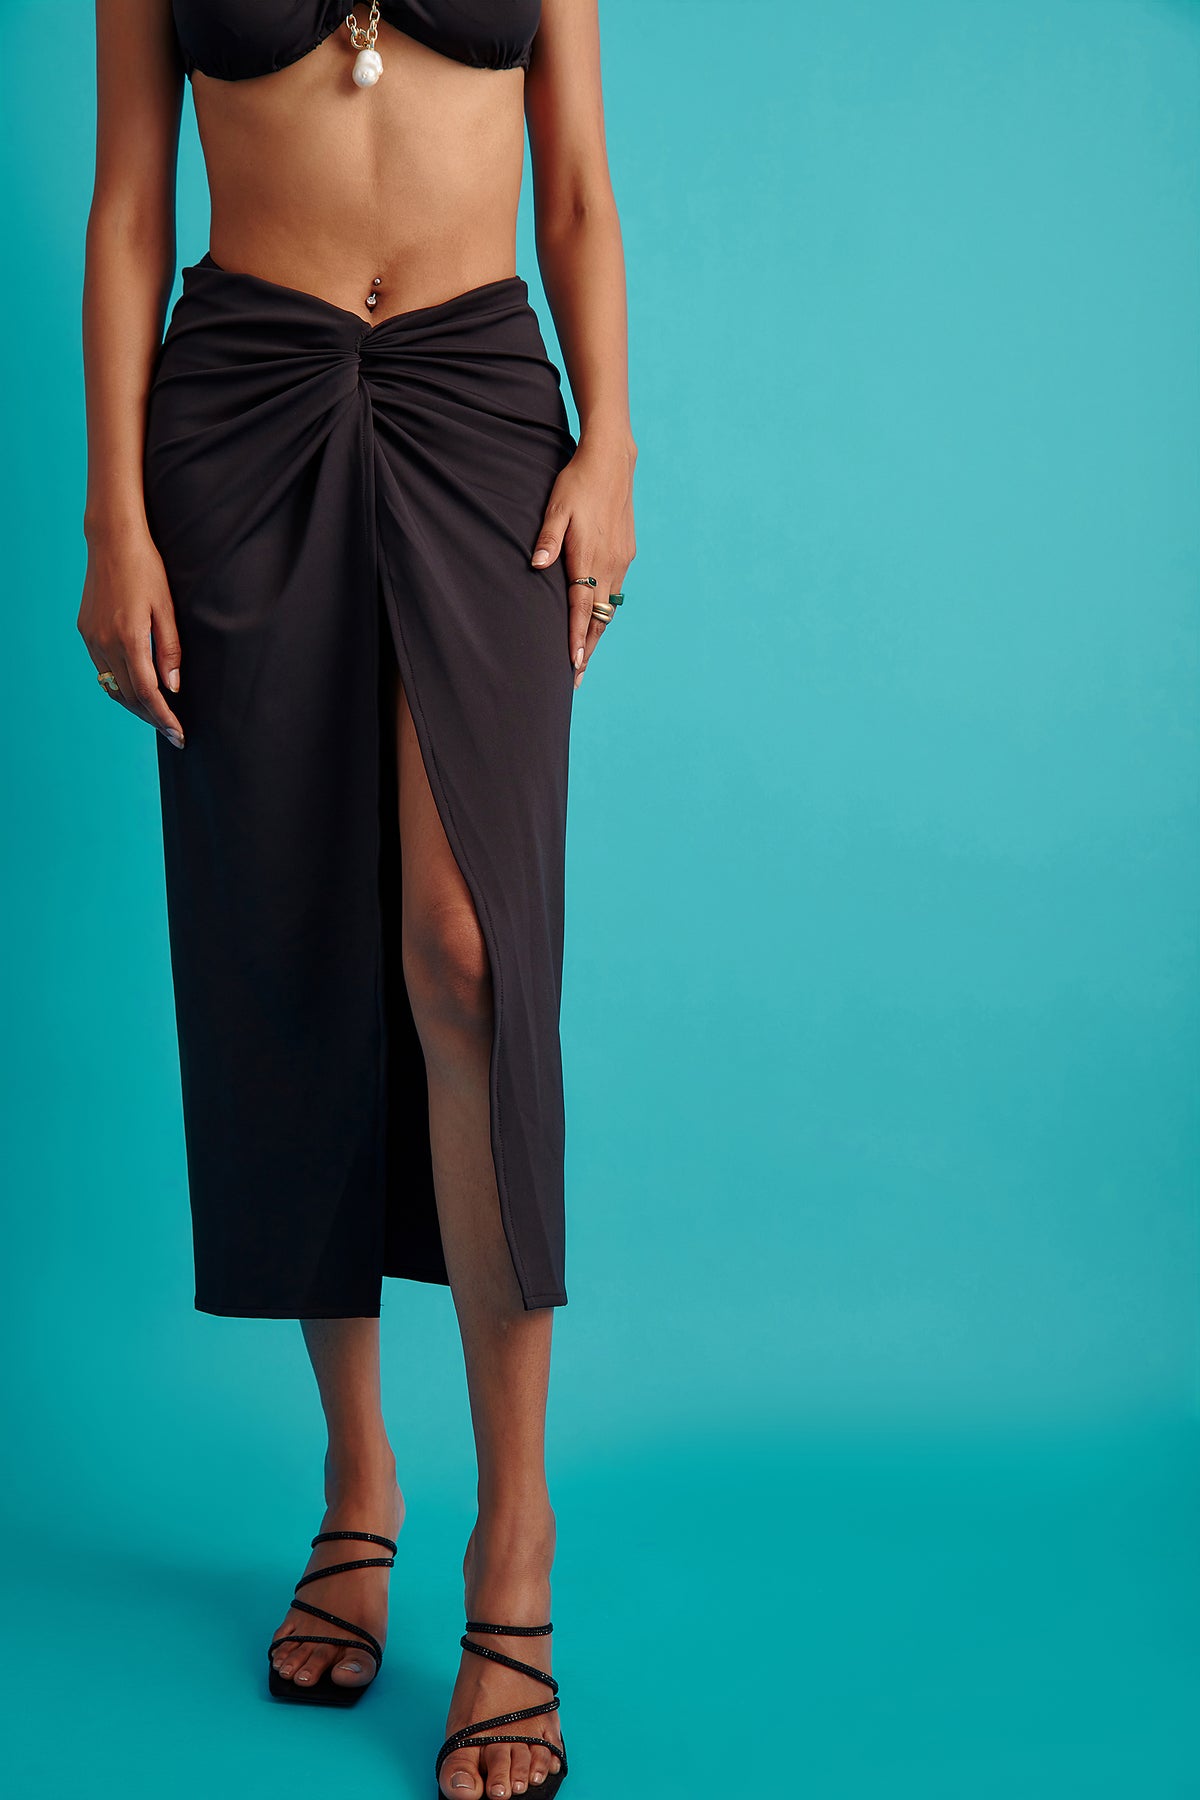 Asymmetrical Knotted Skirt